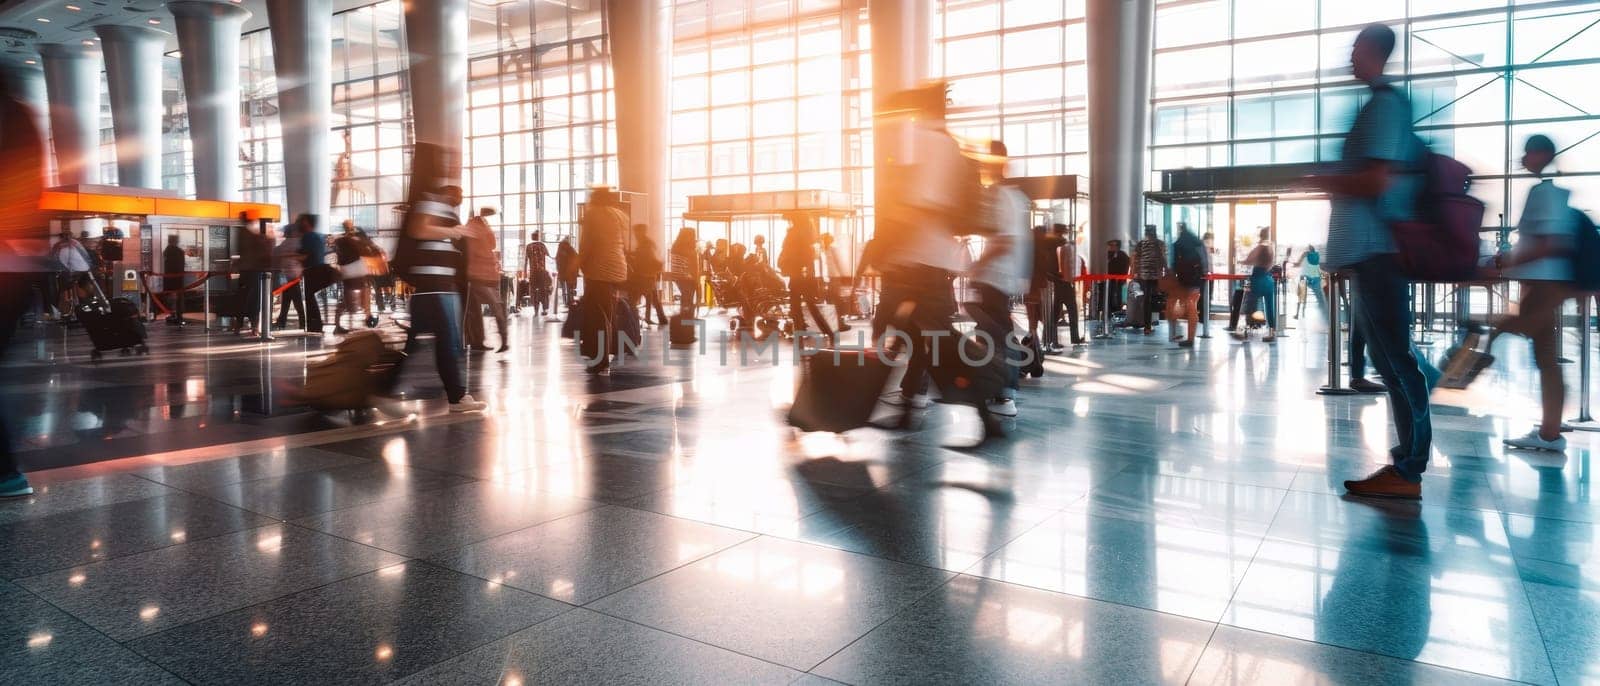 A busy airport with people walking around and carrying luggage by AI generated image.